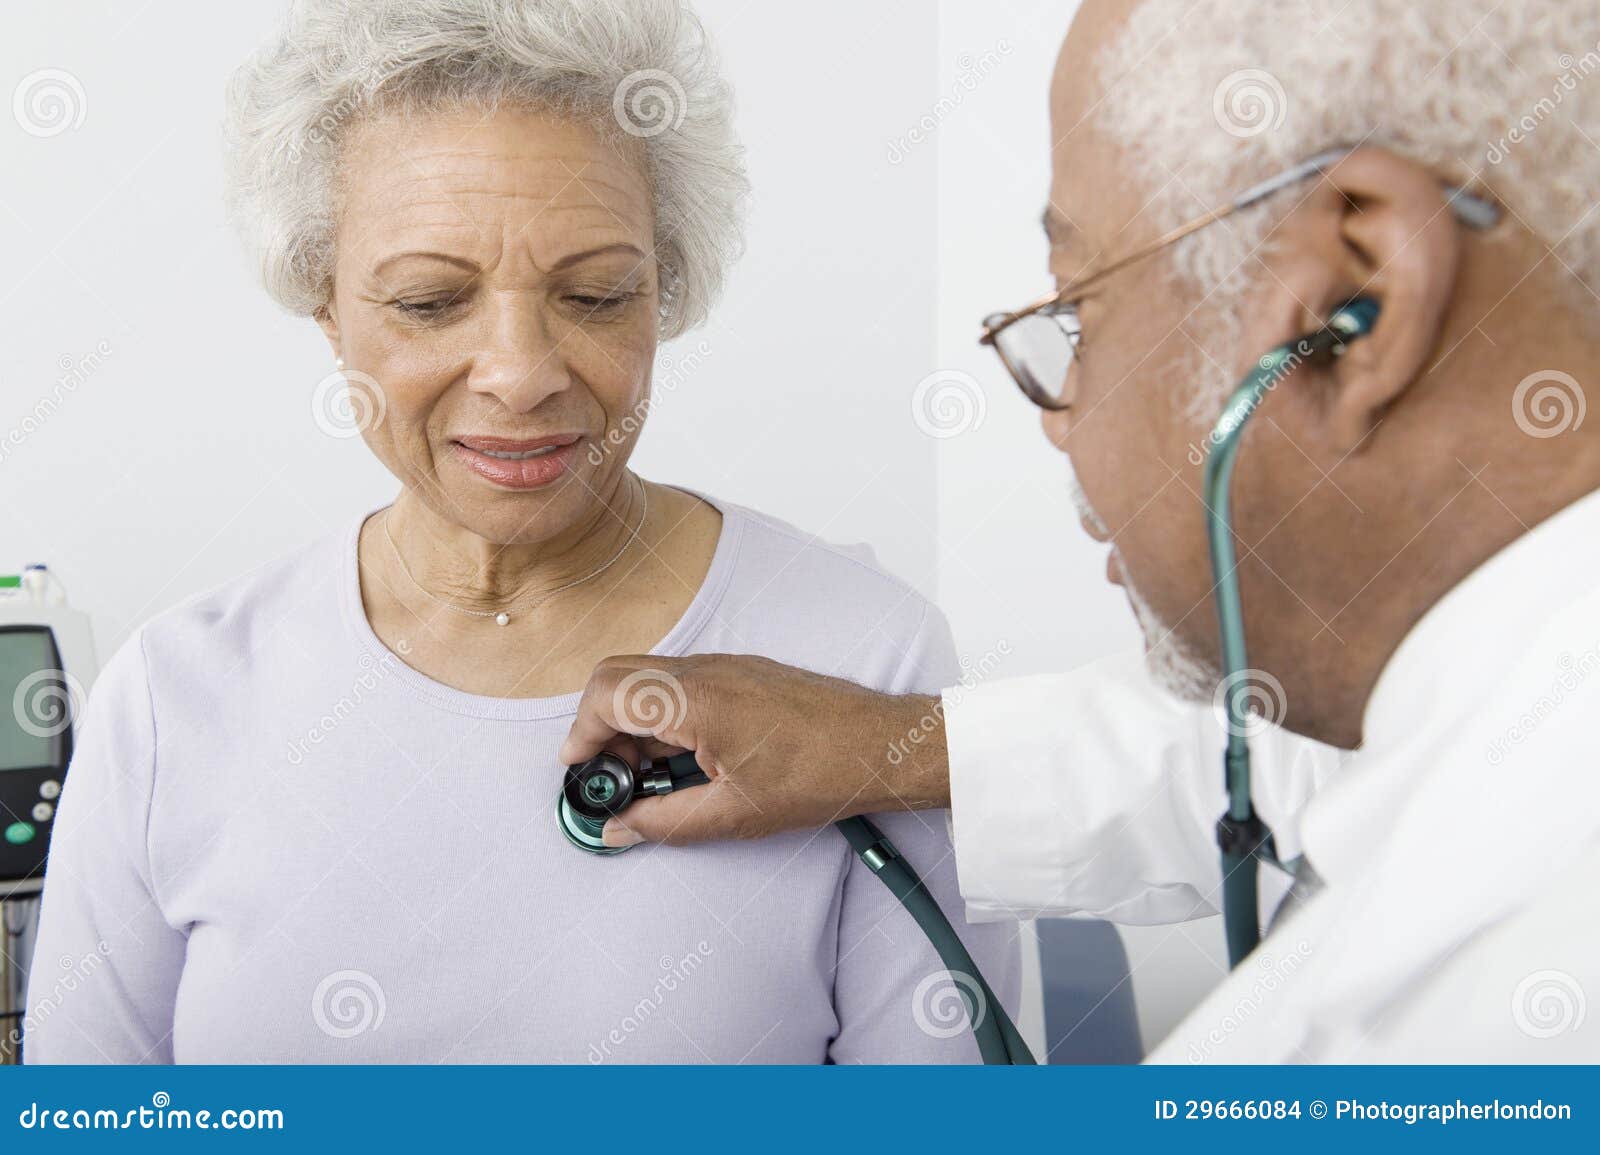 doctor checking patient's heartbeat using stethoscope